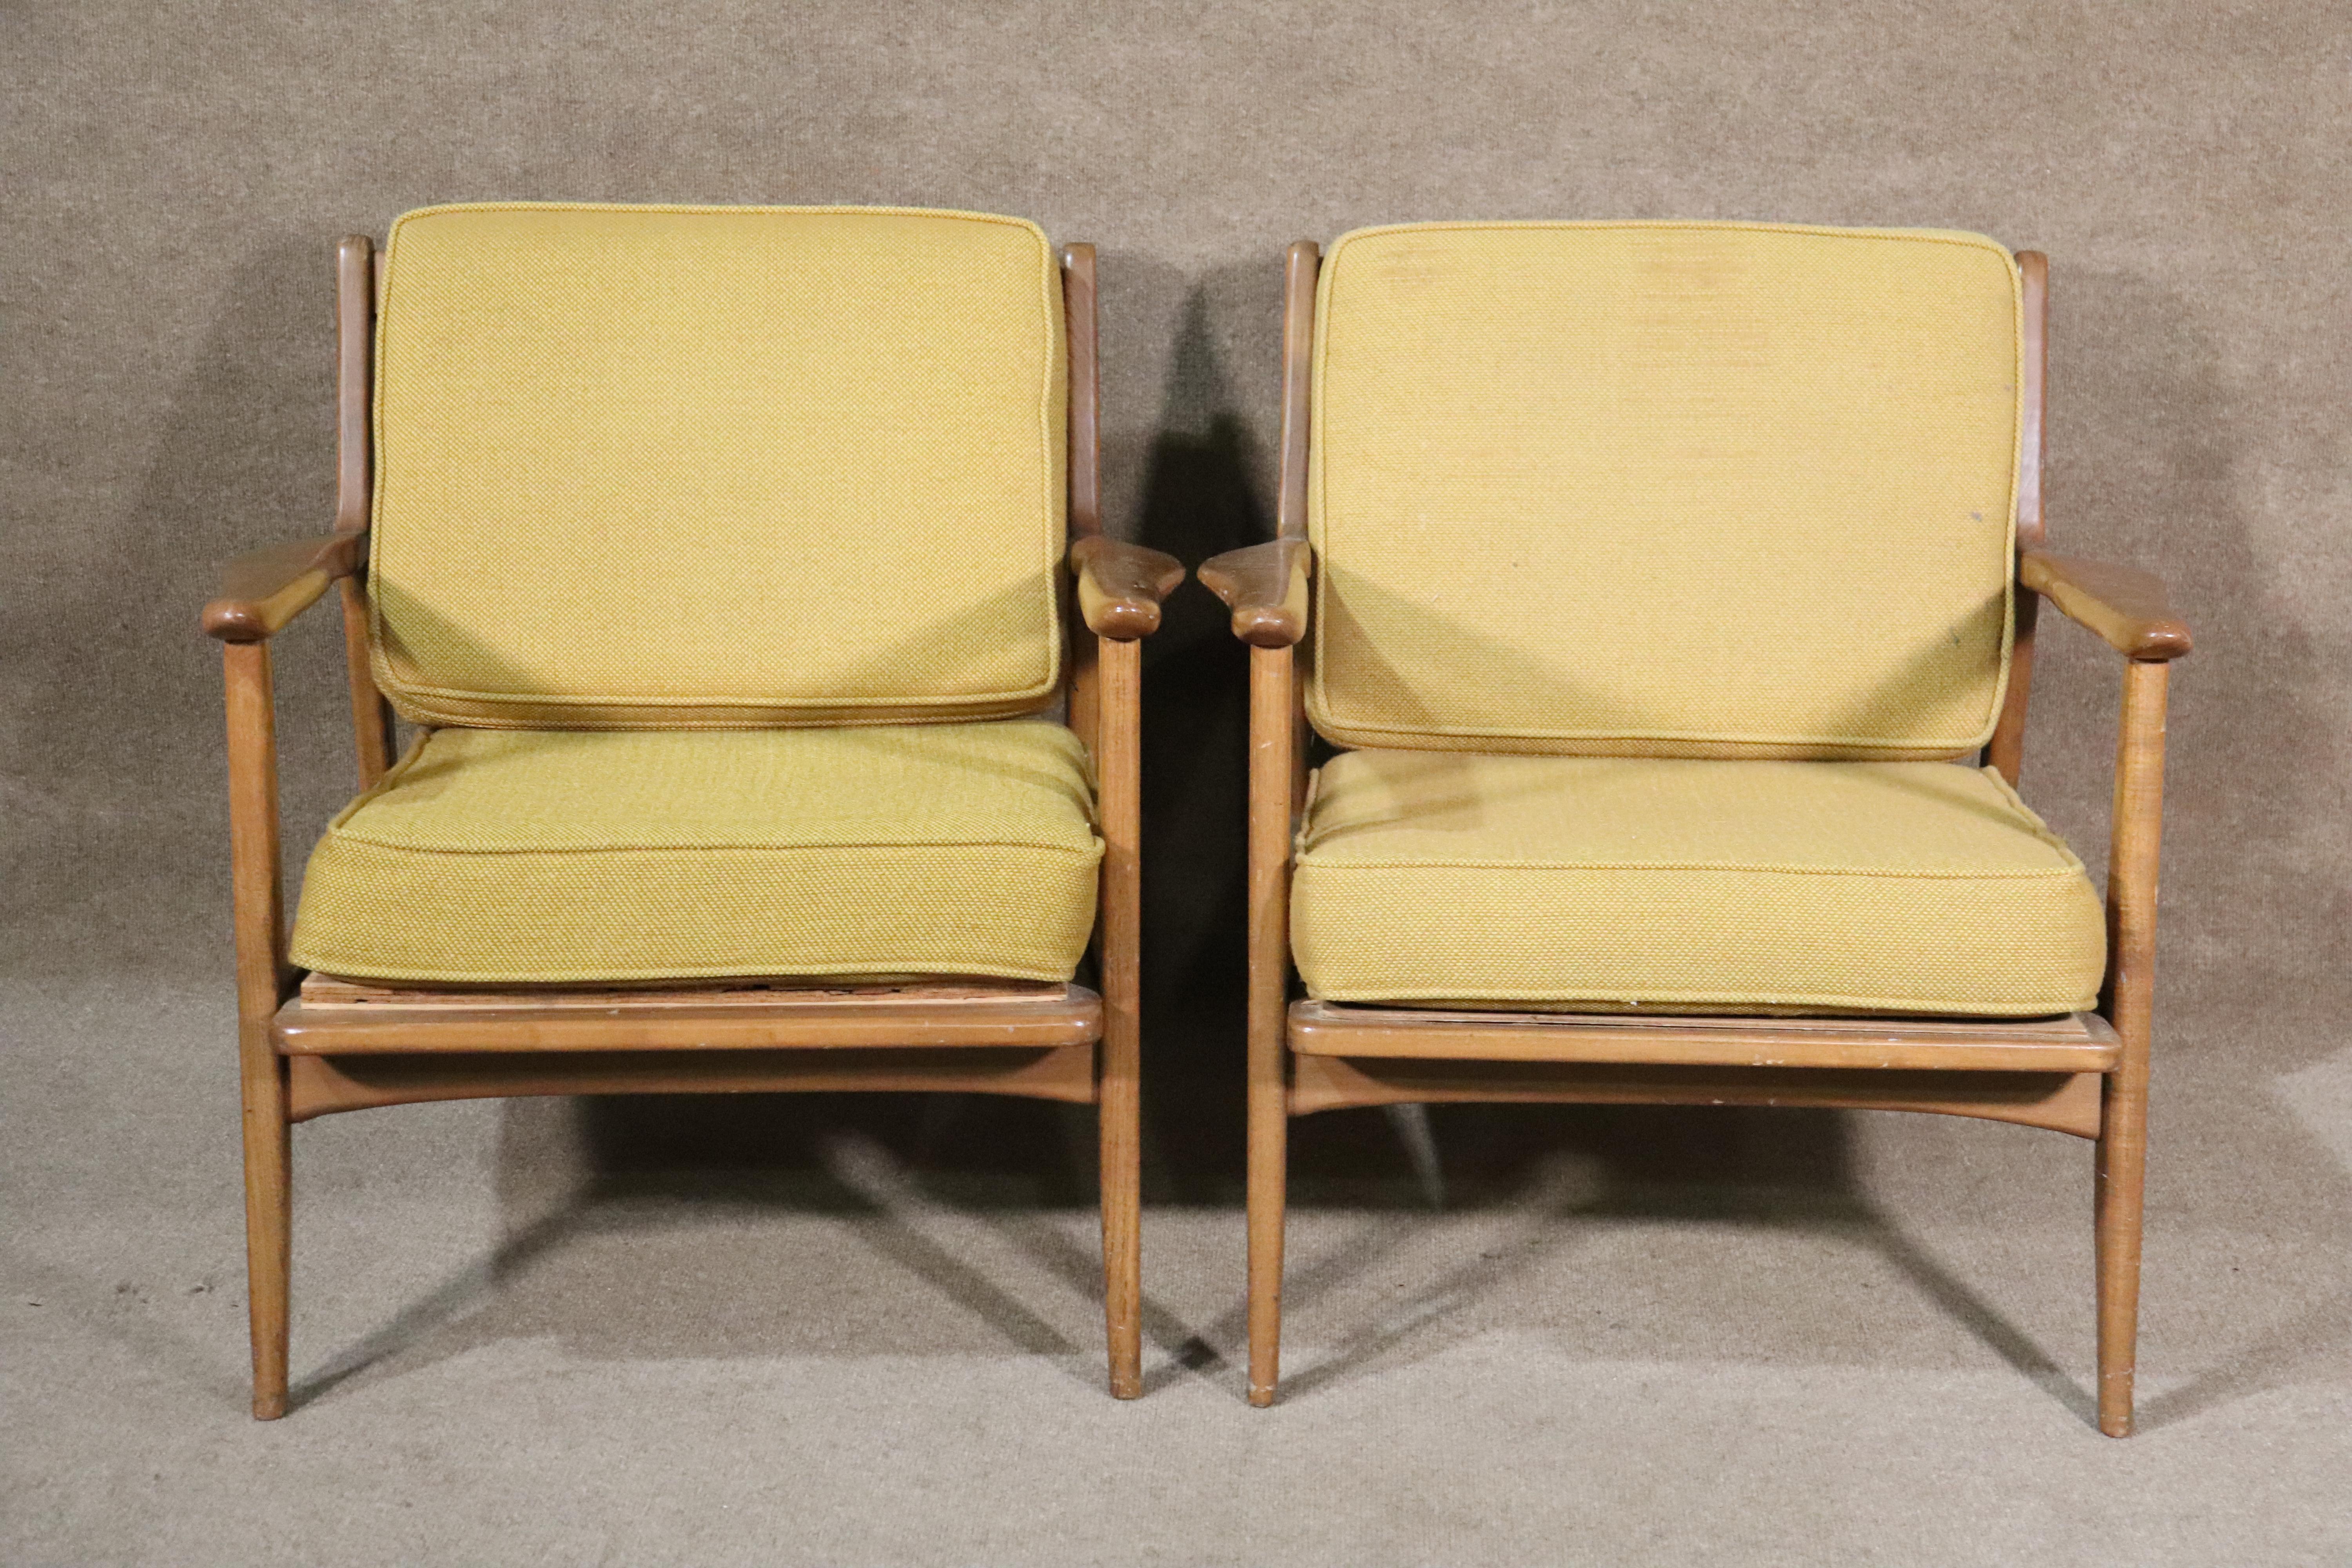 Pair of mid-century modern lounge chairs with slat backs. Two cushions set in a strong walnut frame.
Please confirm location.